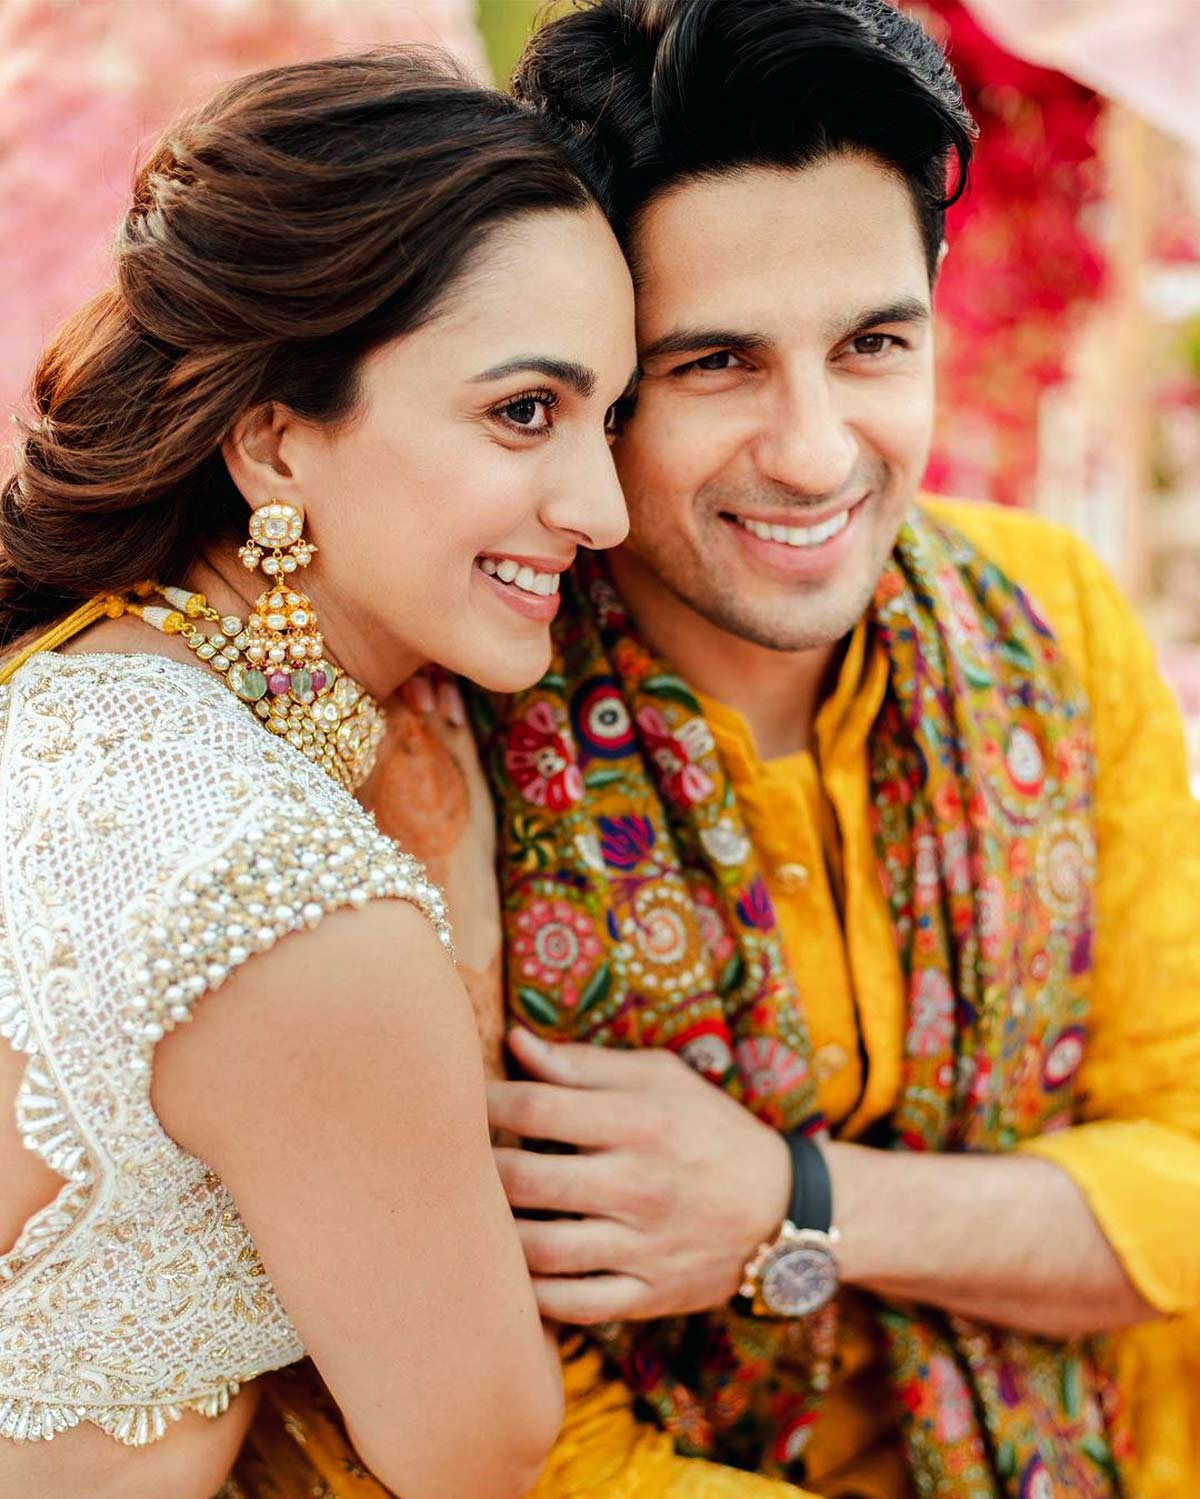 More Pictures From Kiara-Sidharth’s Wedding